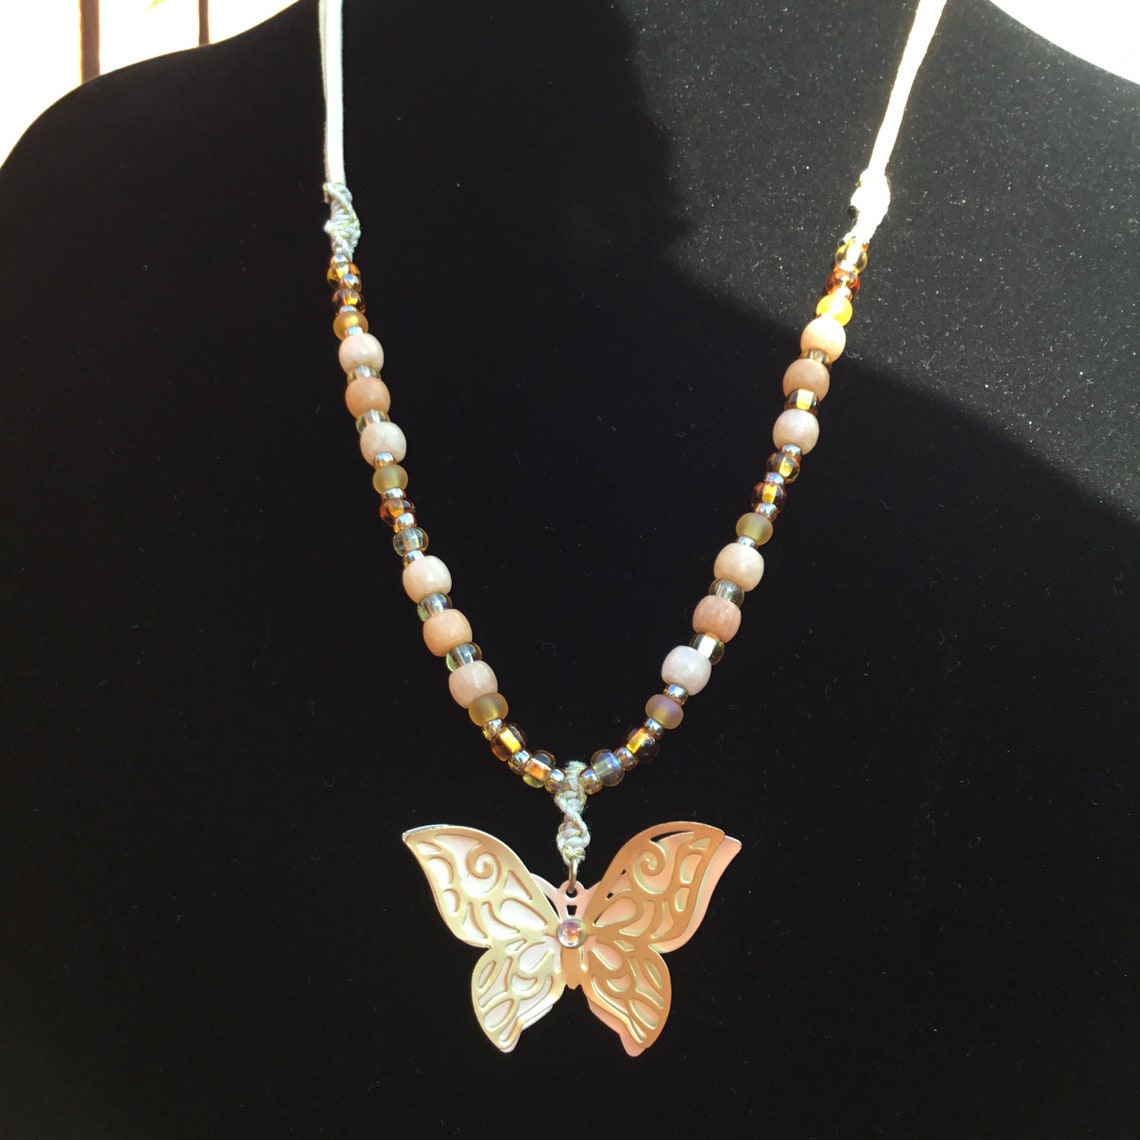 Butterfly Shine Beaded Leather Necklace - Etsy